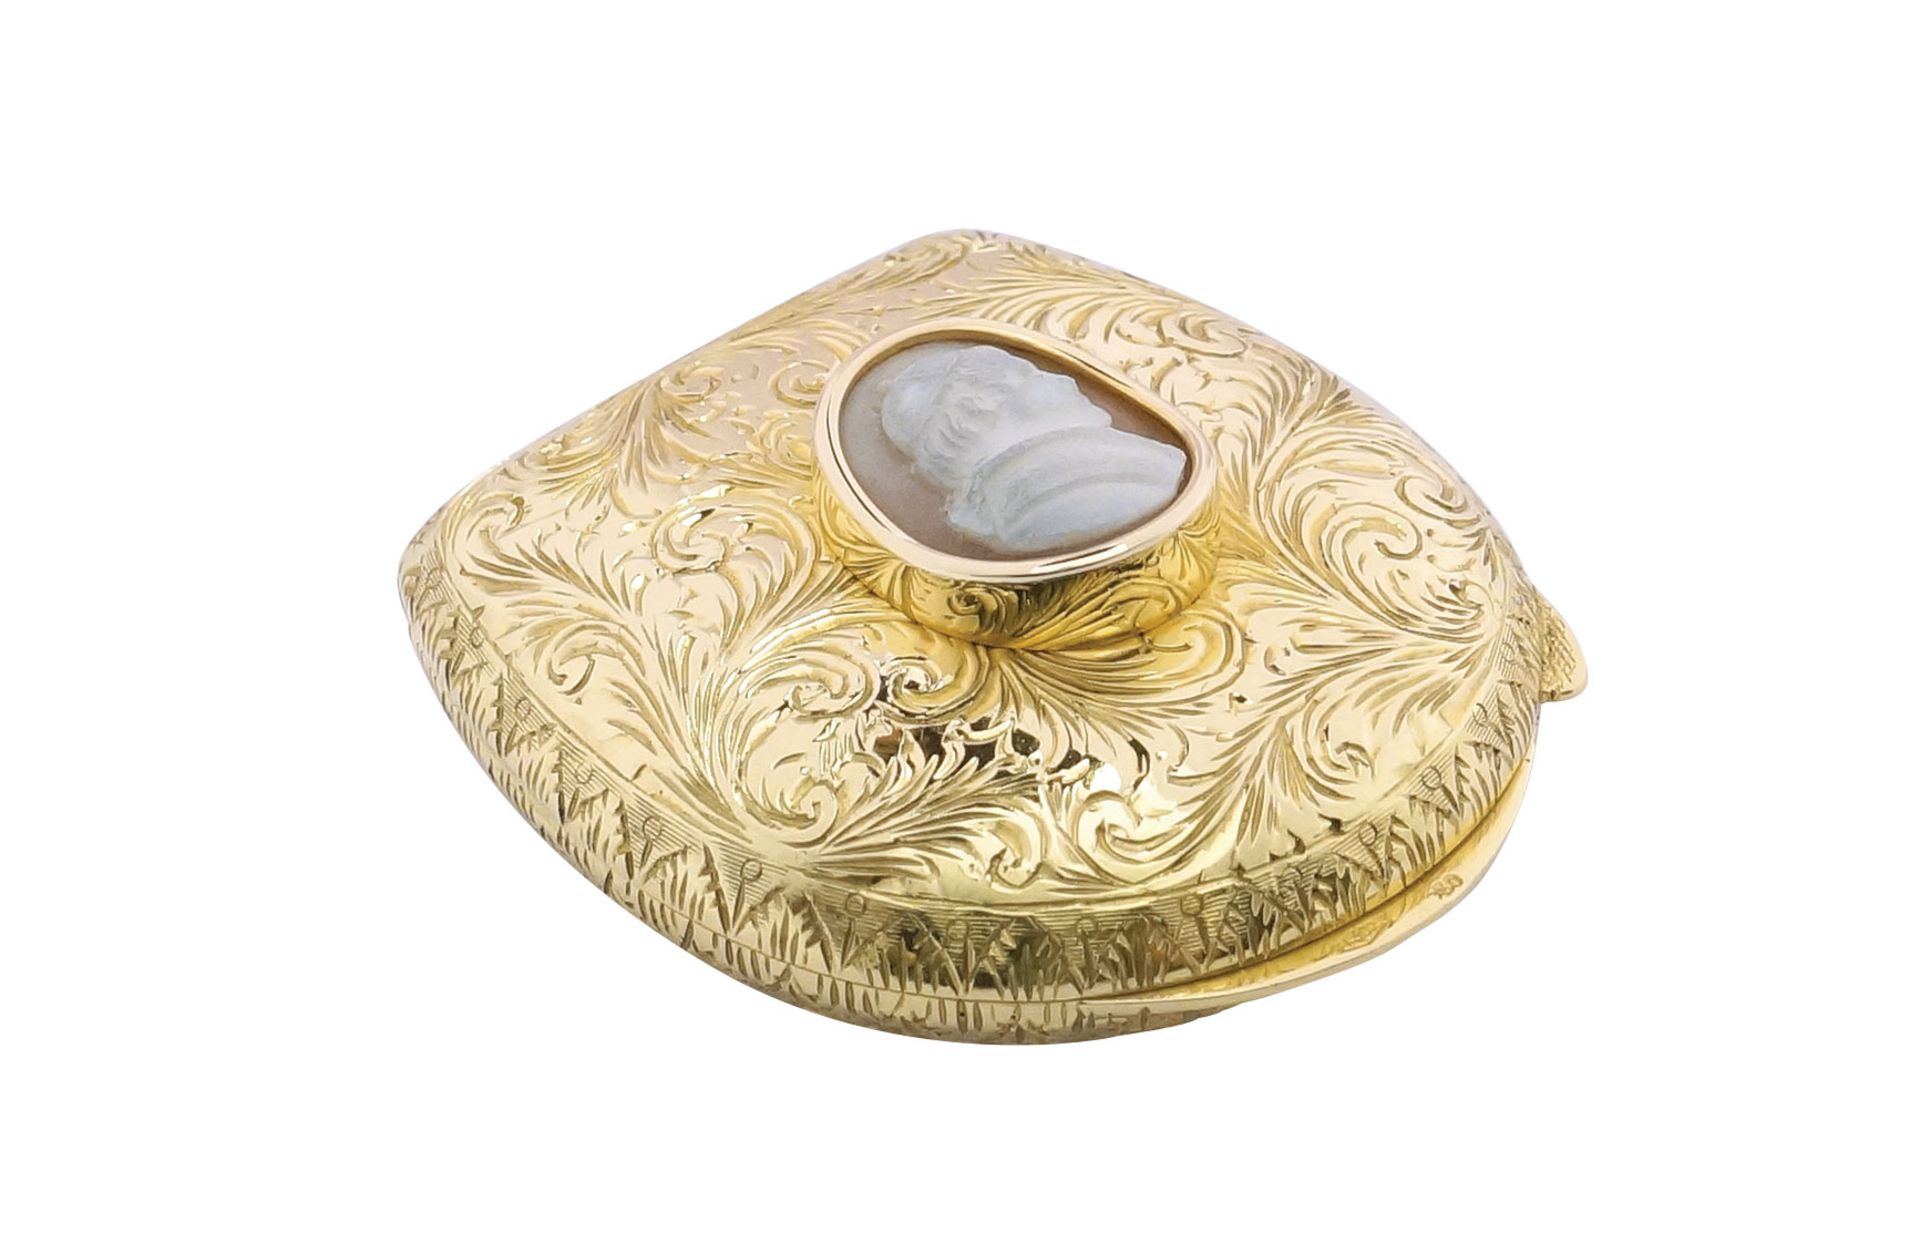 An 18k gold and cameo pill box